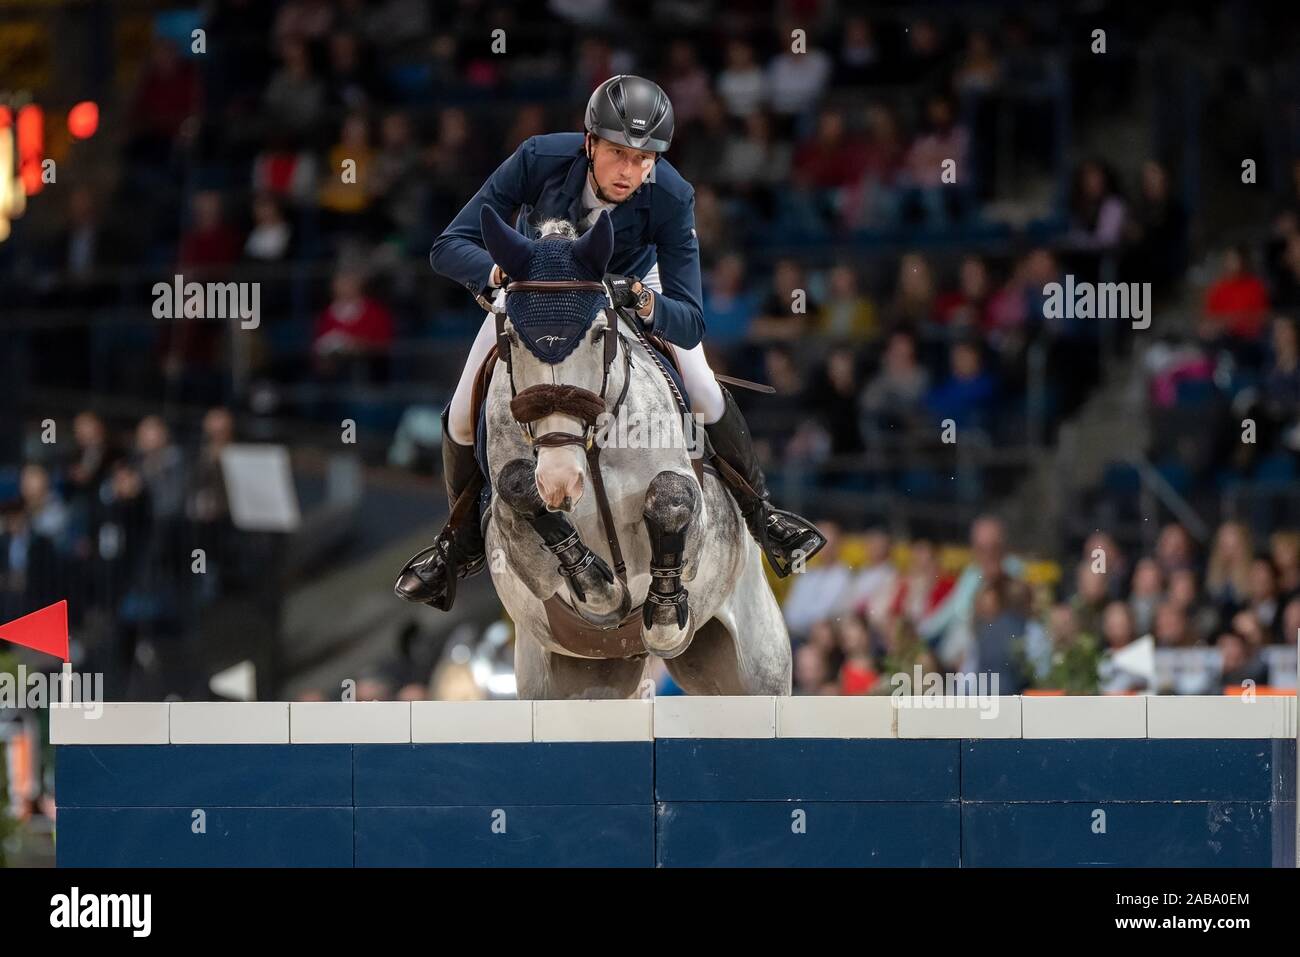 STUTTGART, GERMANY - NOVEMBER 17: Martin Fuchs (SUI) riding Silver Shine at the Stuttgart German Master 2019 - Longines FEI Jumping World Cup 2019/2020, Int. Jumping competition with jump-off - Grand Prix of Stuttgart presend by Mercedes-Benz, Walter solar and BW-Bank at the Hans-Martin-Schleyer-Halle on November 17, 2019 in Stuttgart, GERMANY. Stock Photo